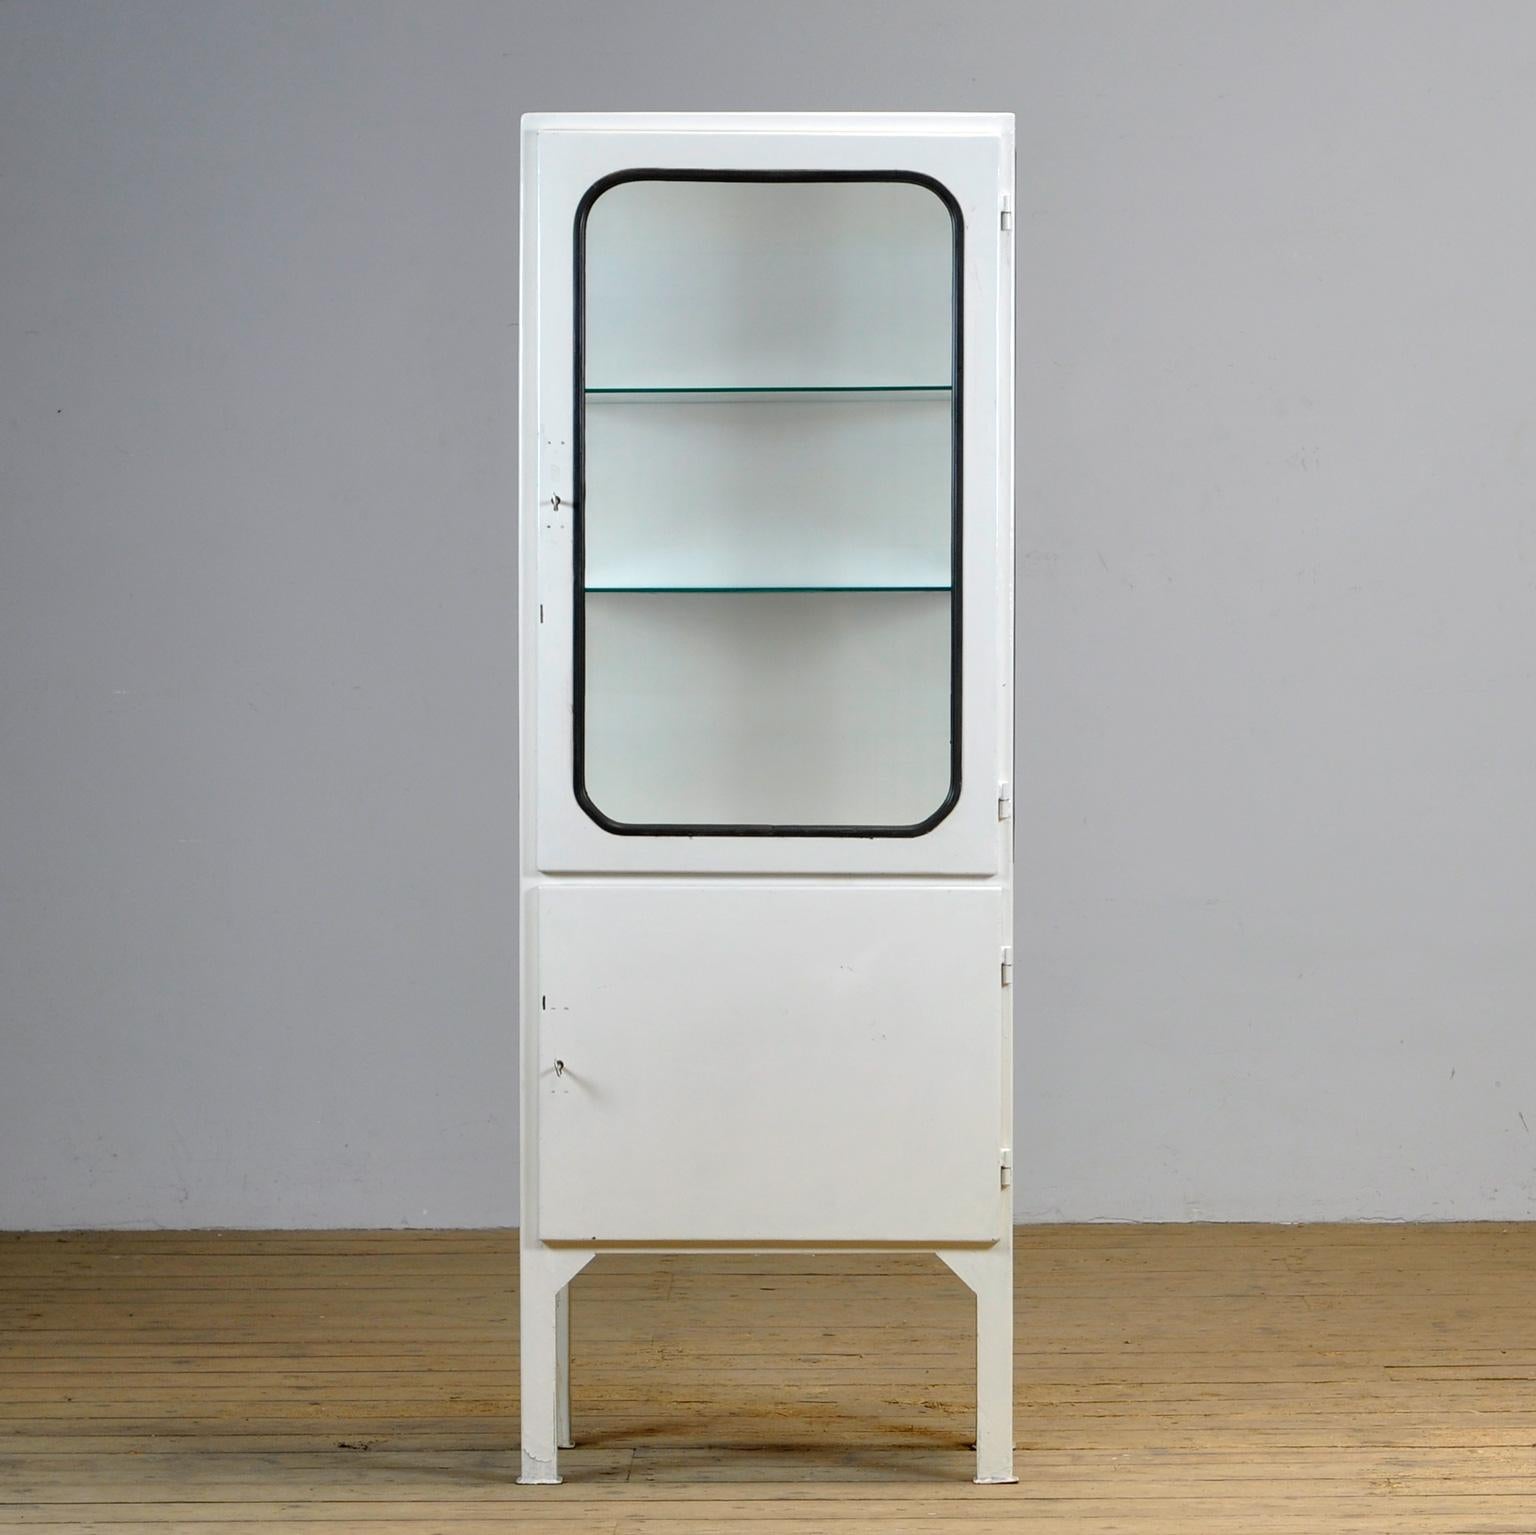 This medical cabinet was designed in the 1970s and was produced circa 1975 in hungary. It is made from iron and glass with new glass shelves. The glass is held by a black rubber strip. The cabinet features two adjustable glass shelves and a